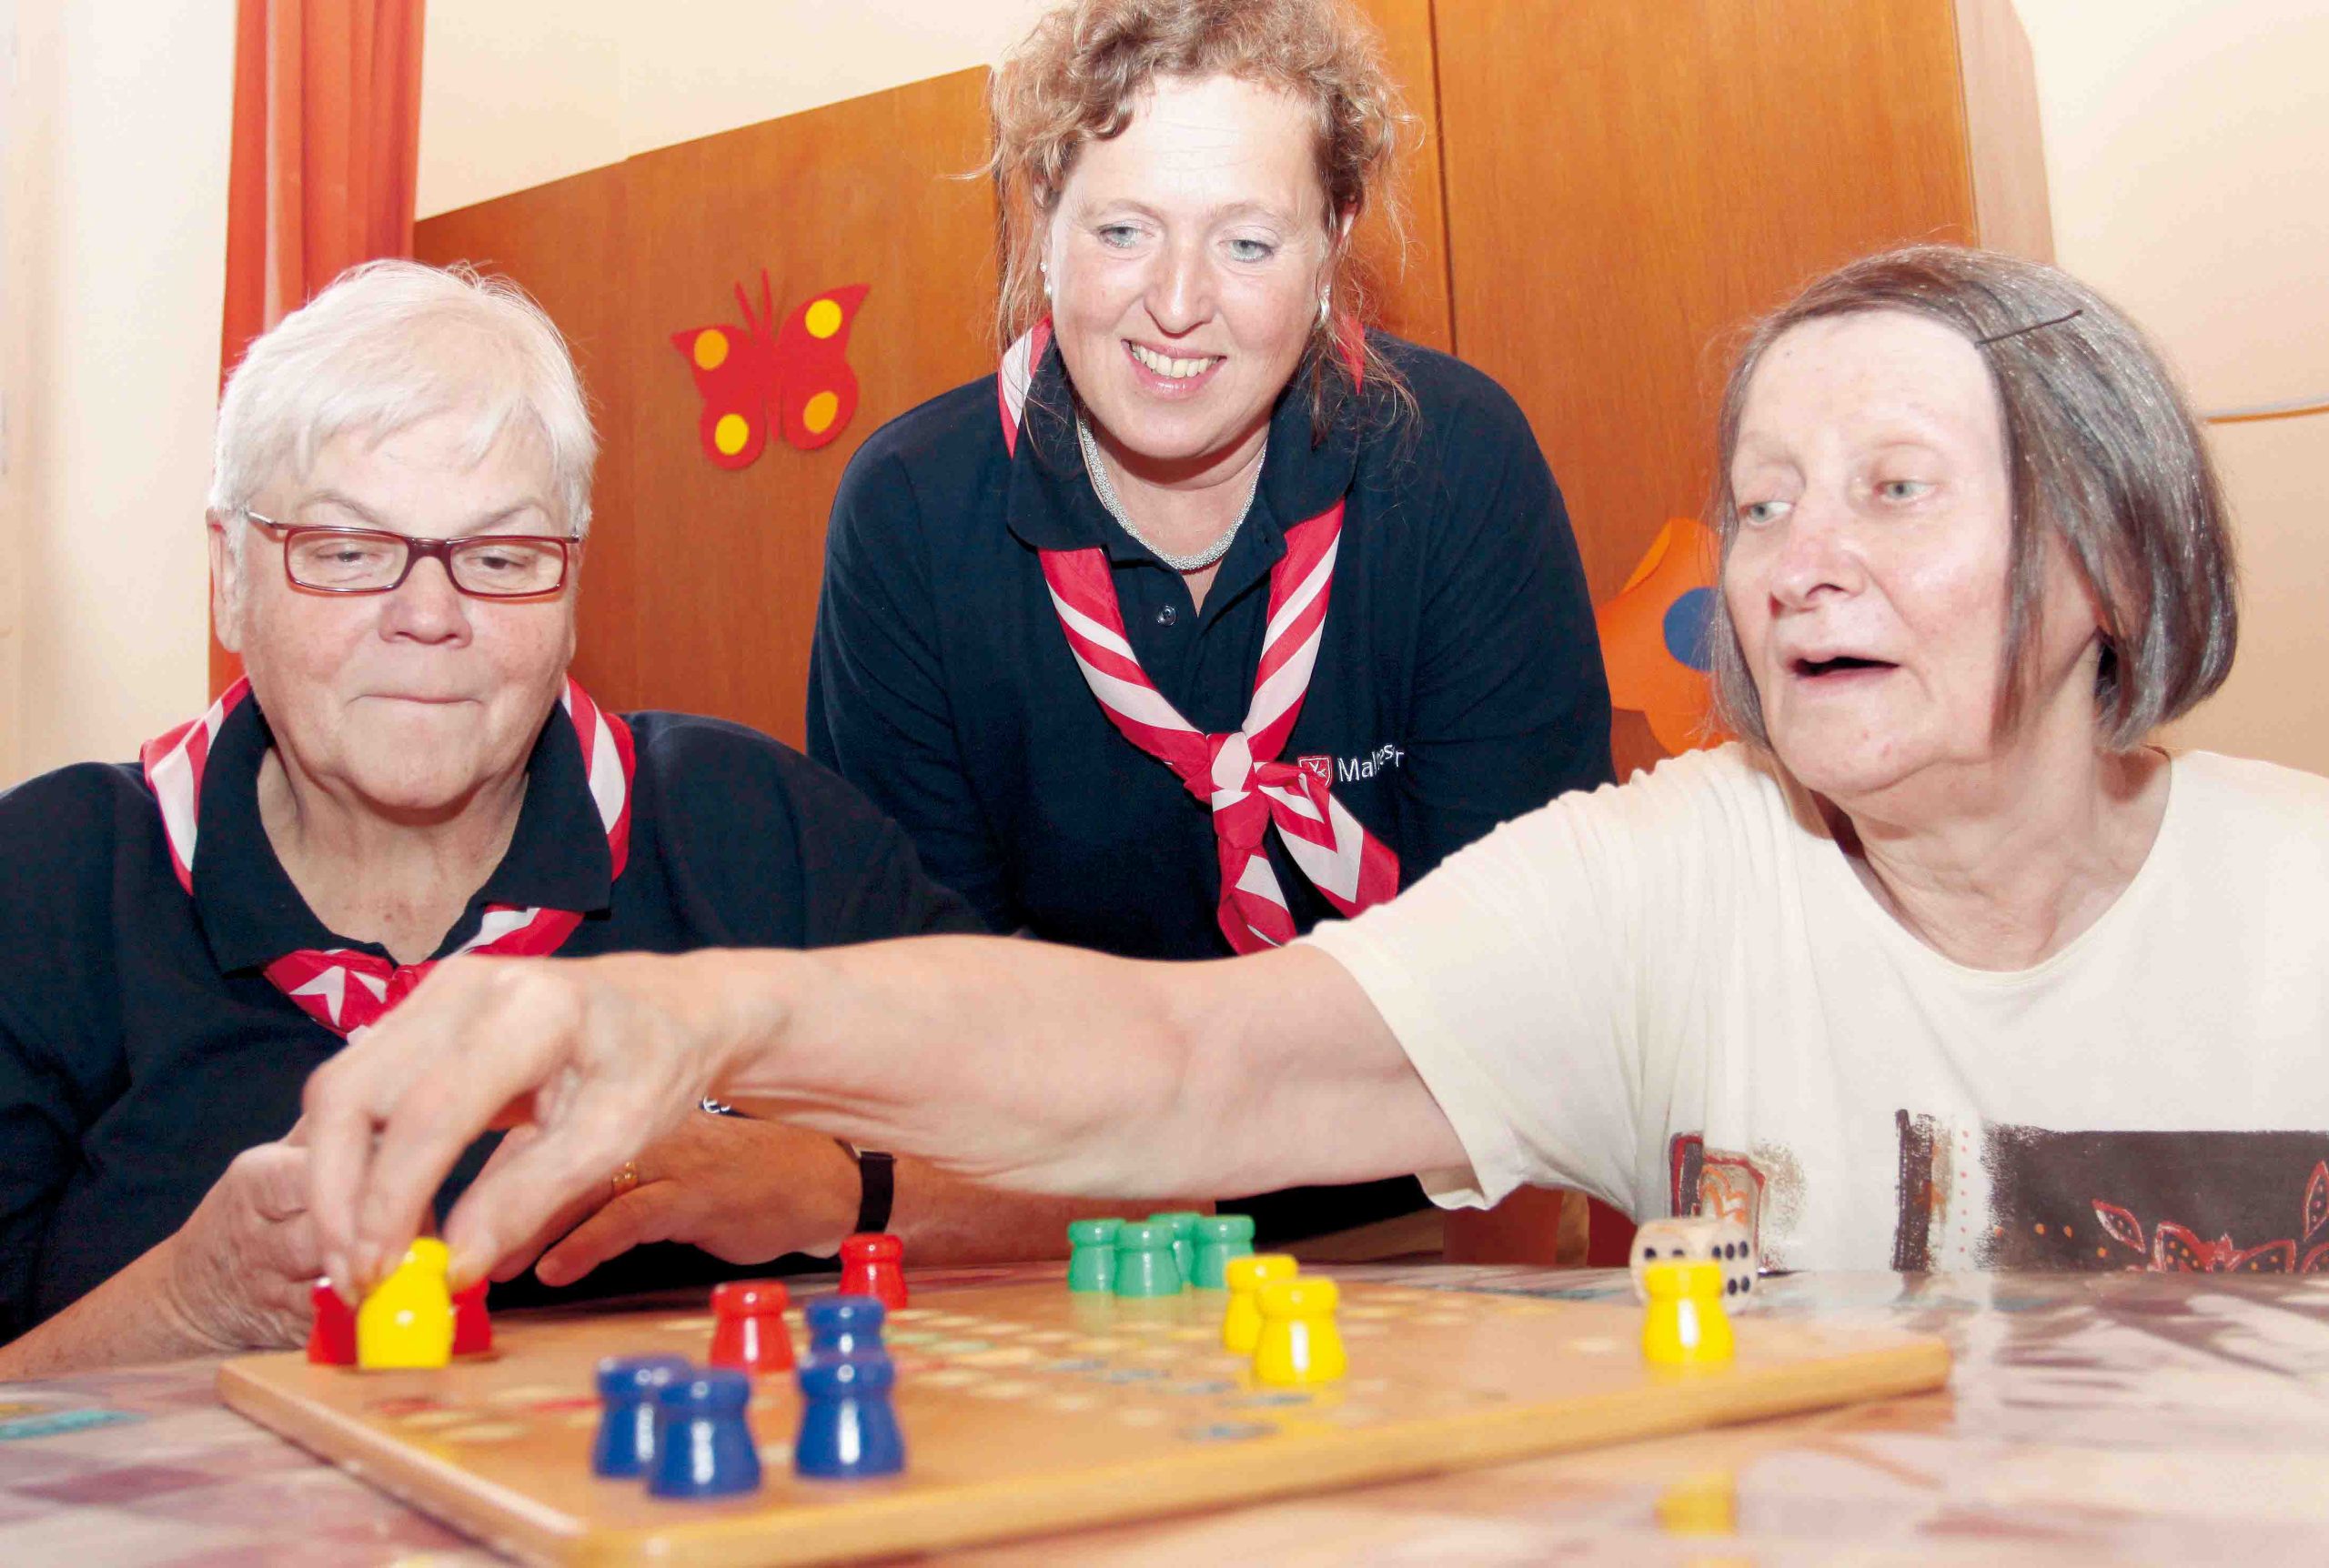 Dealing with Dementia, the Order of Malta’s long experience in Europe